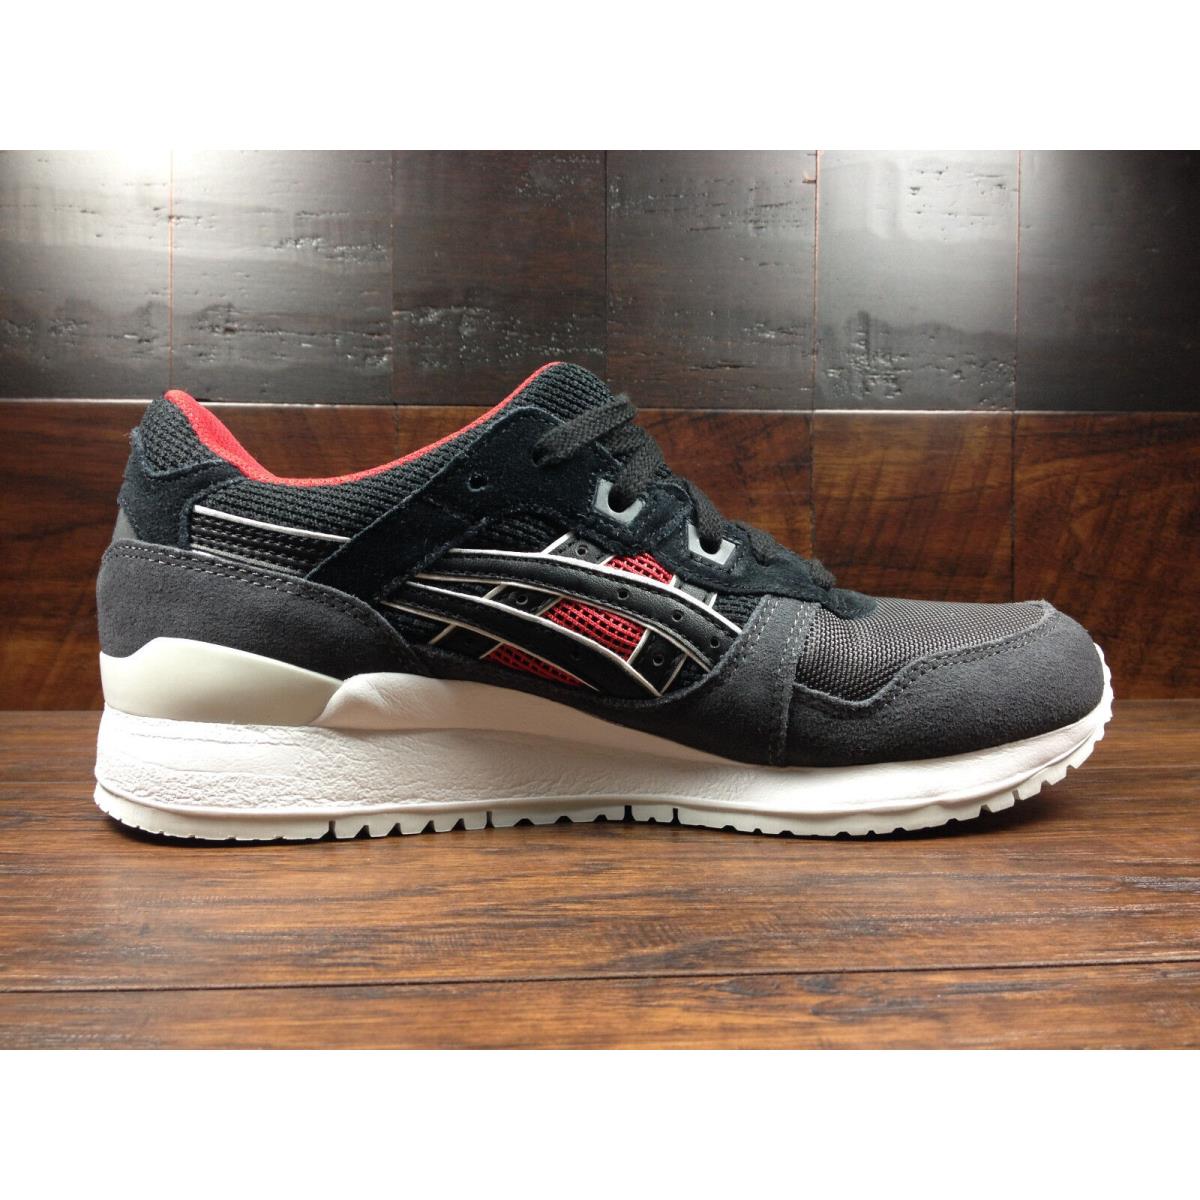 ASICS shoes III - Black / Grey / Red 1